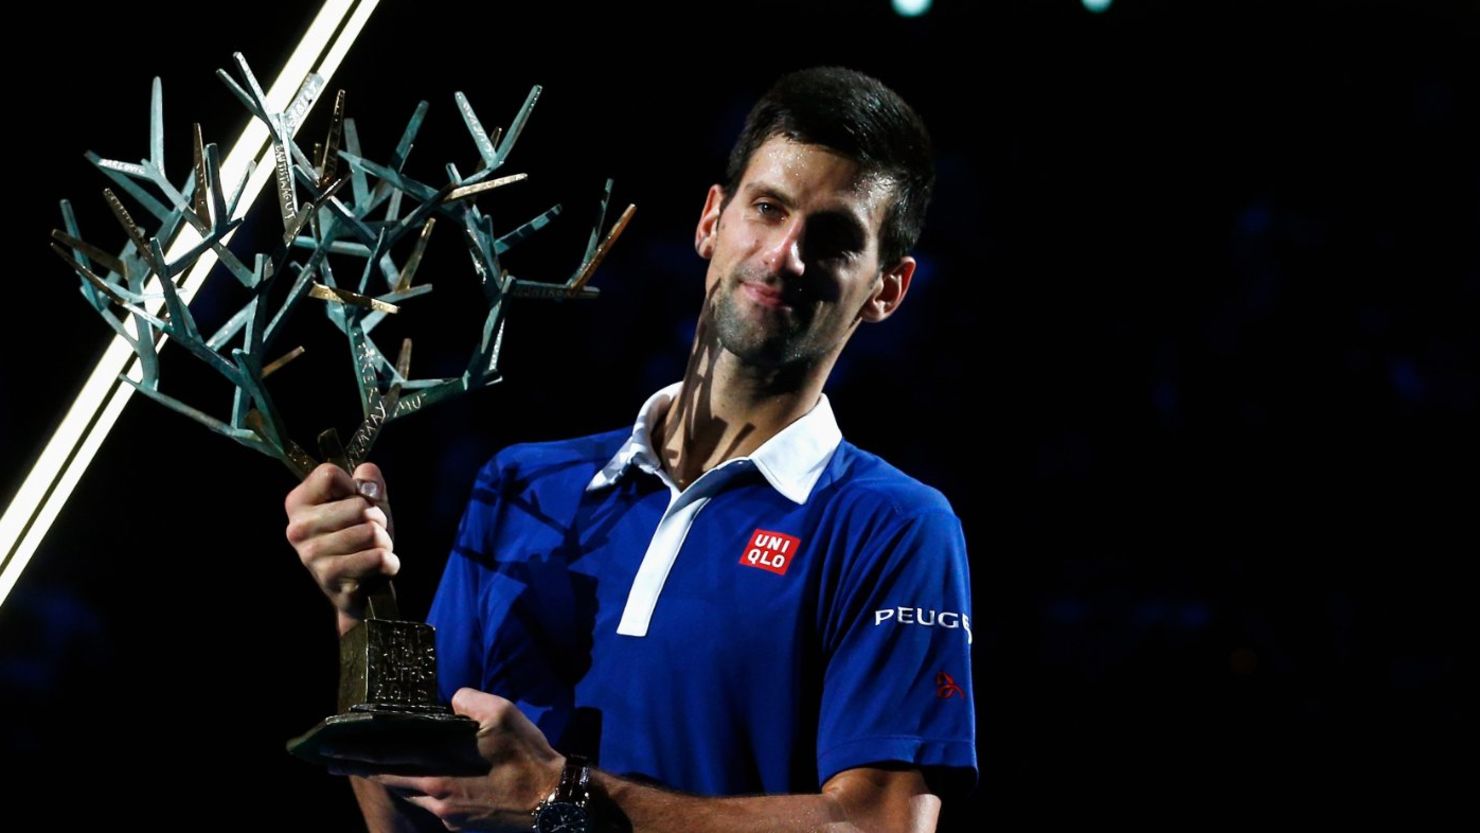 Novak Djokovic lifts the trophy after victory after beating Andy Murray of Great Britain in the final of the Paris Masters1000 tournament. 